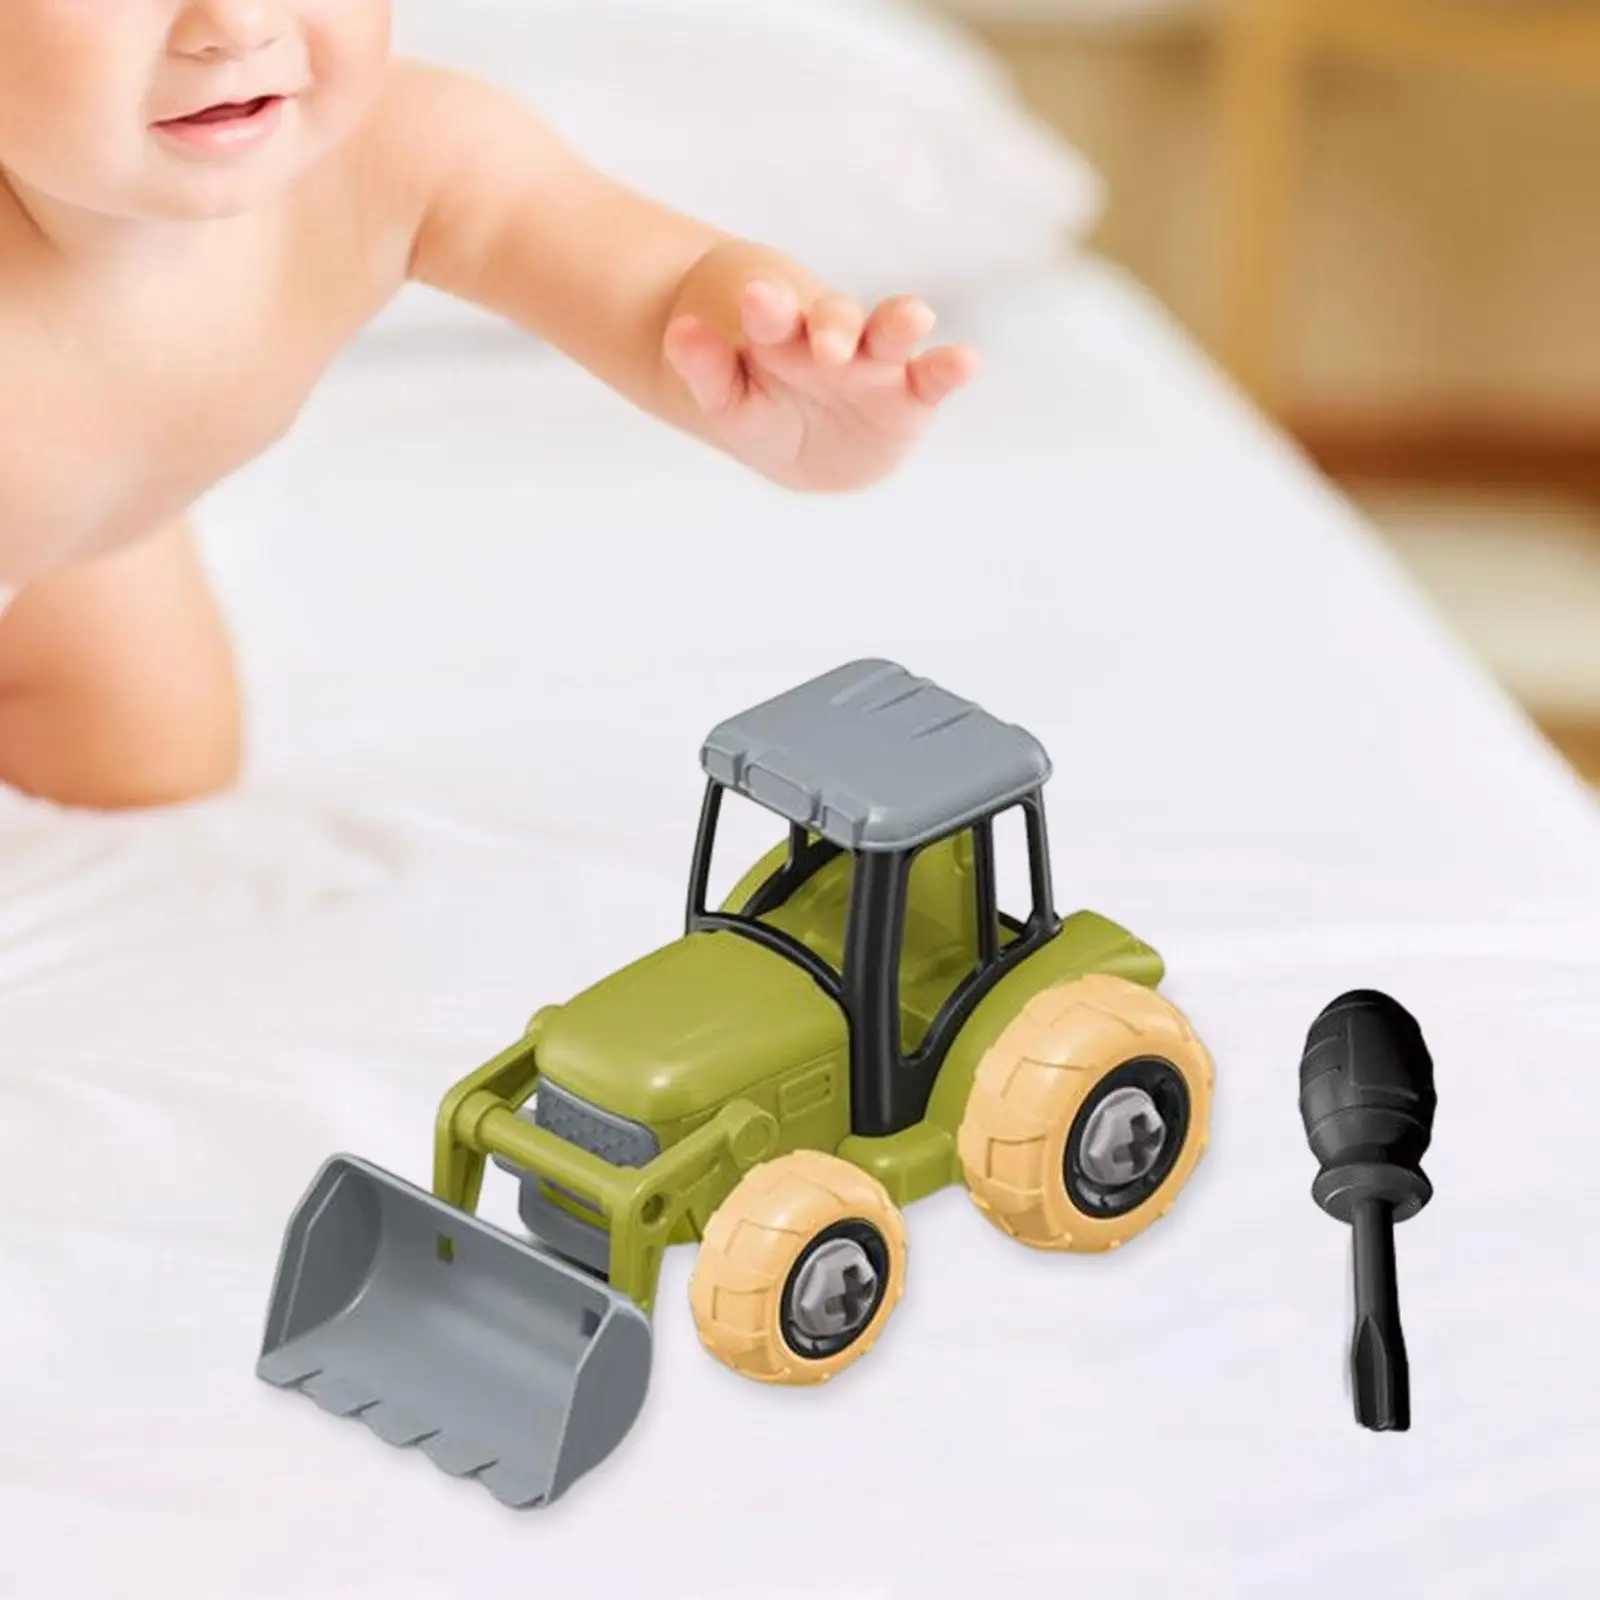 Take Apart Toy Excavator Truck Hands on Ability DIY Assemble Toys W/ Screwdriver for Preschool 3 4 5 6 7 Year Old Birthday Gifts